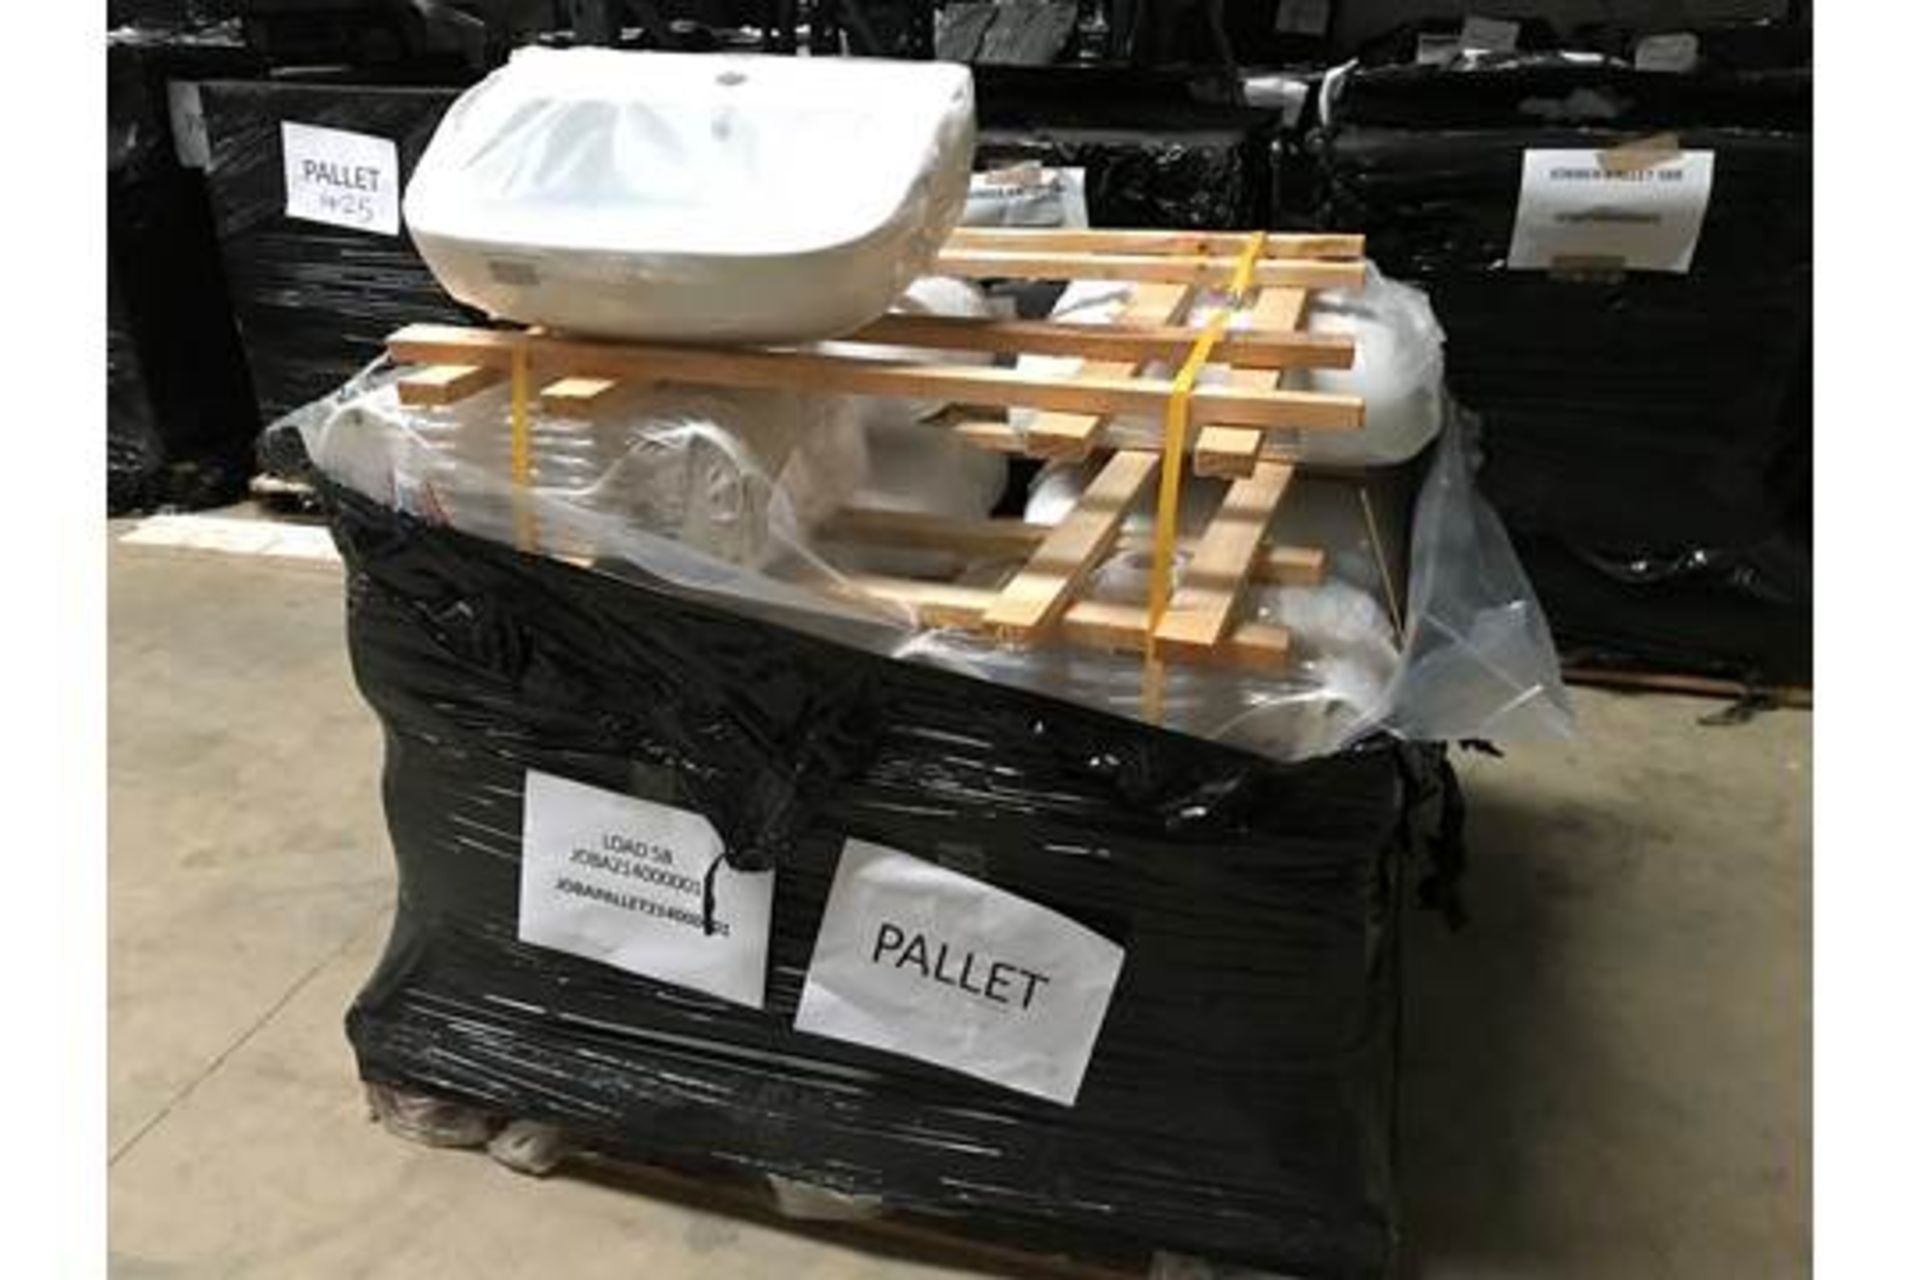 Pallet 271 - 16 x Phase Short Projection Basin - Image 3 of 3